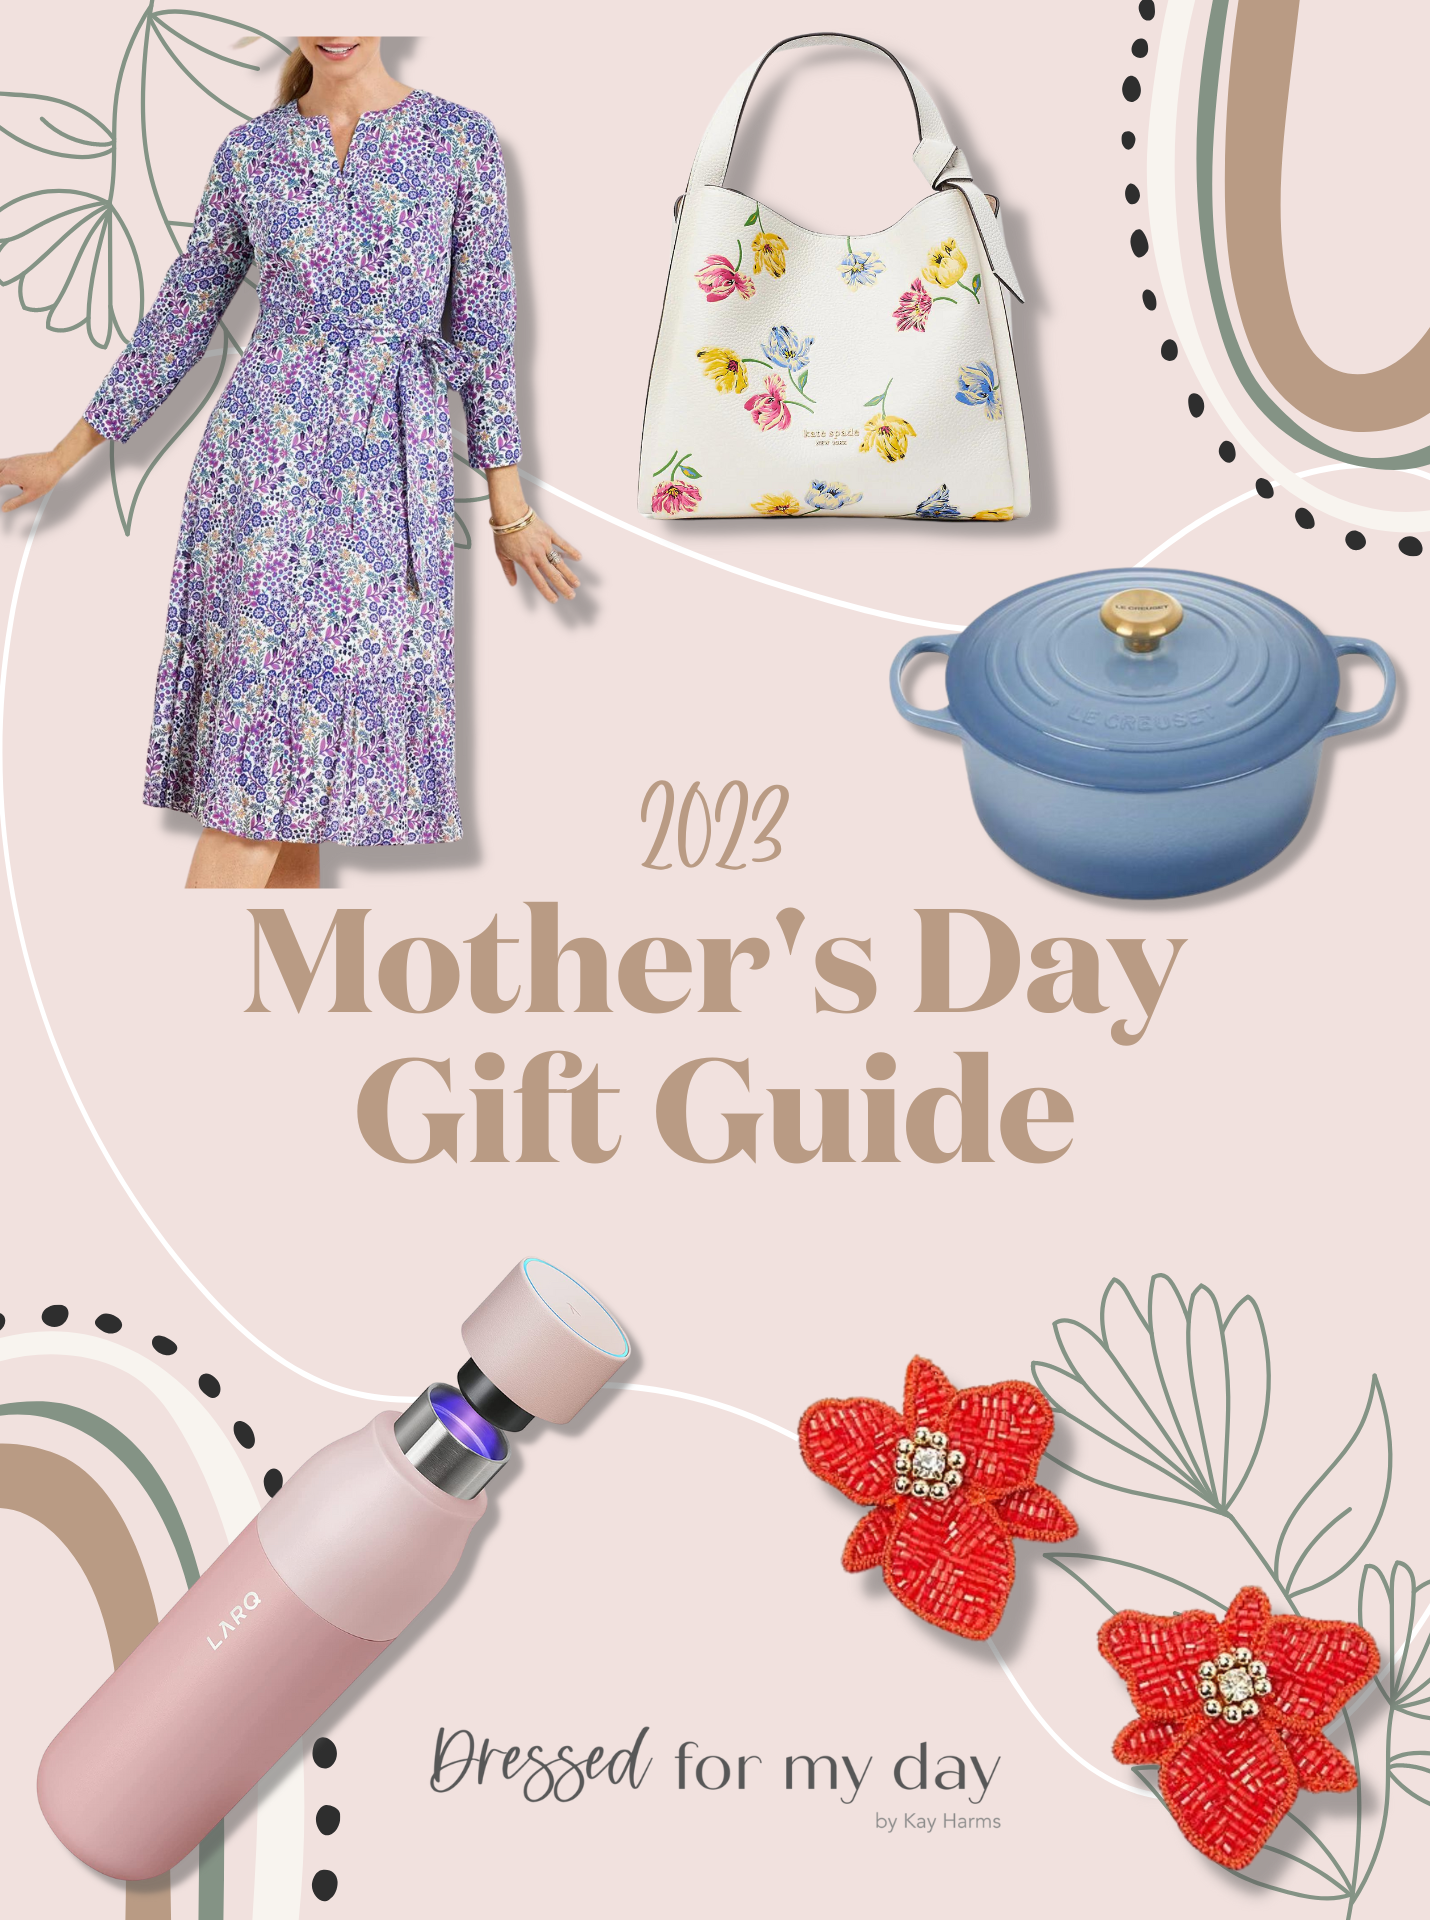 My 2023 Mother's Day Gift Guide